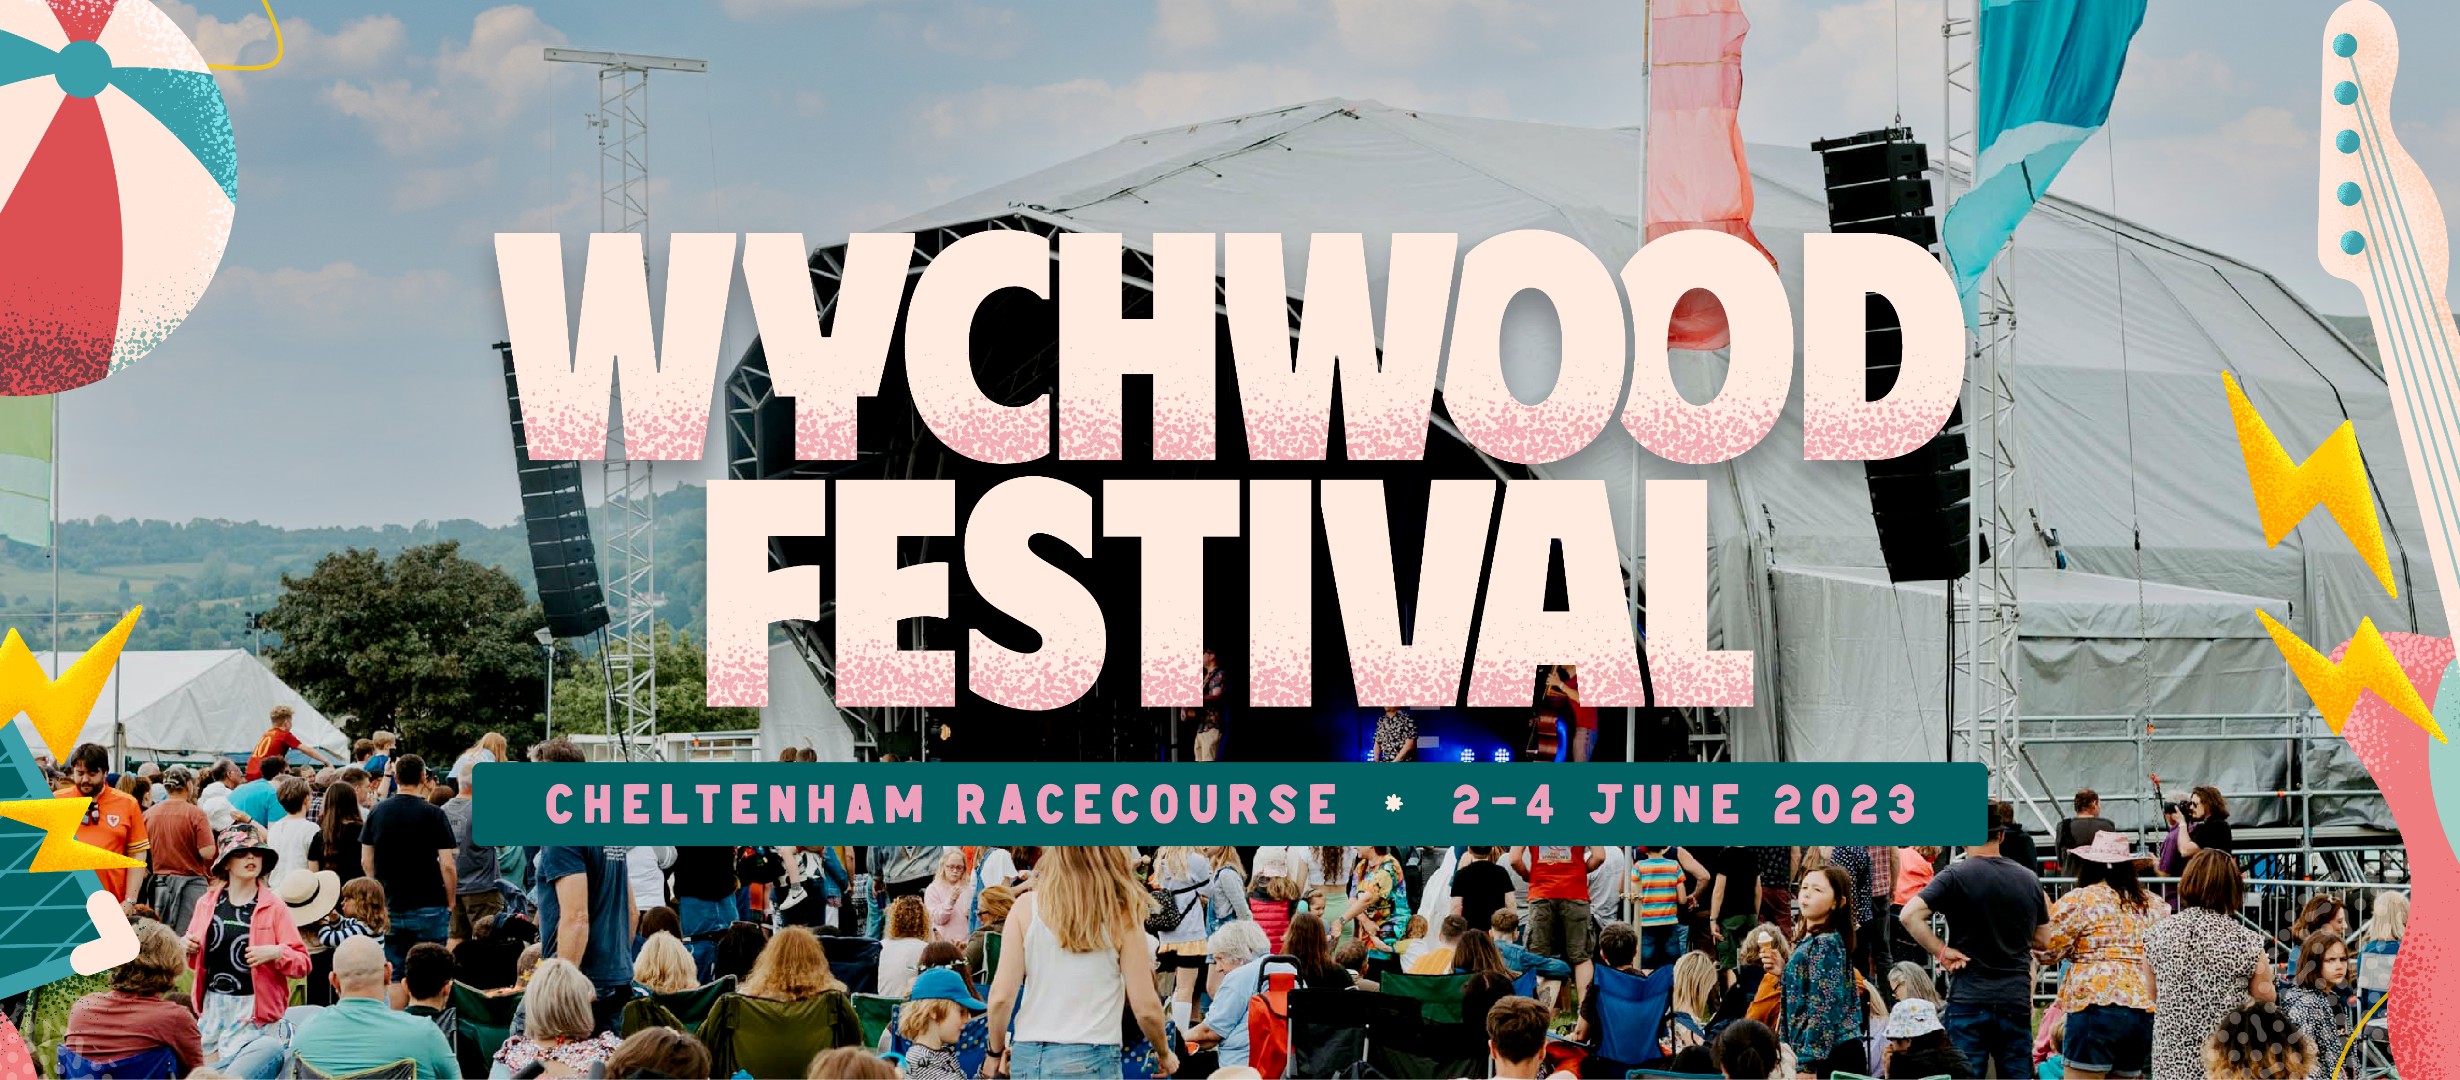 Wychwood Festival logo with it's location of Cheltenham Racecourse and 2023 dates of 2nd to 4th June over the top of a picture of the main stage at Wychwood Festival.